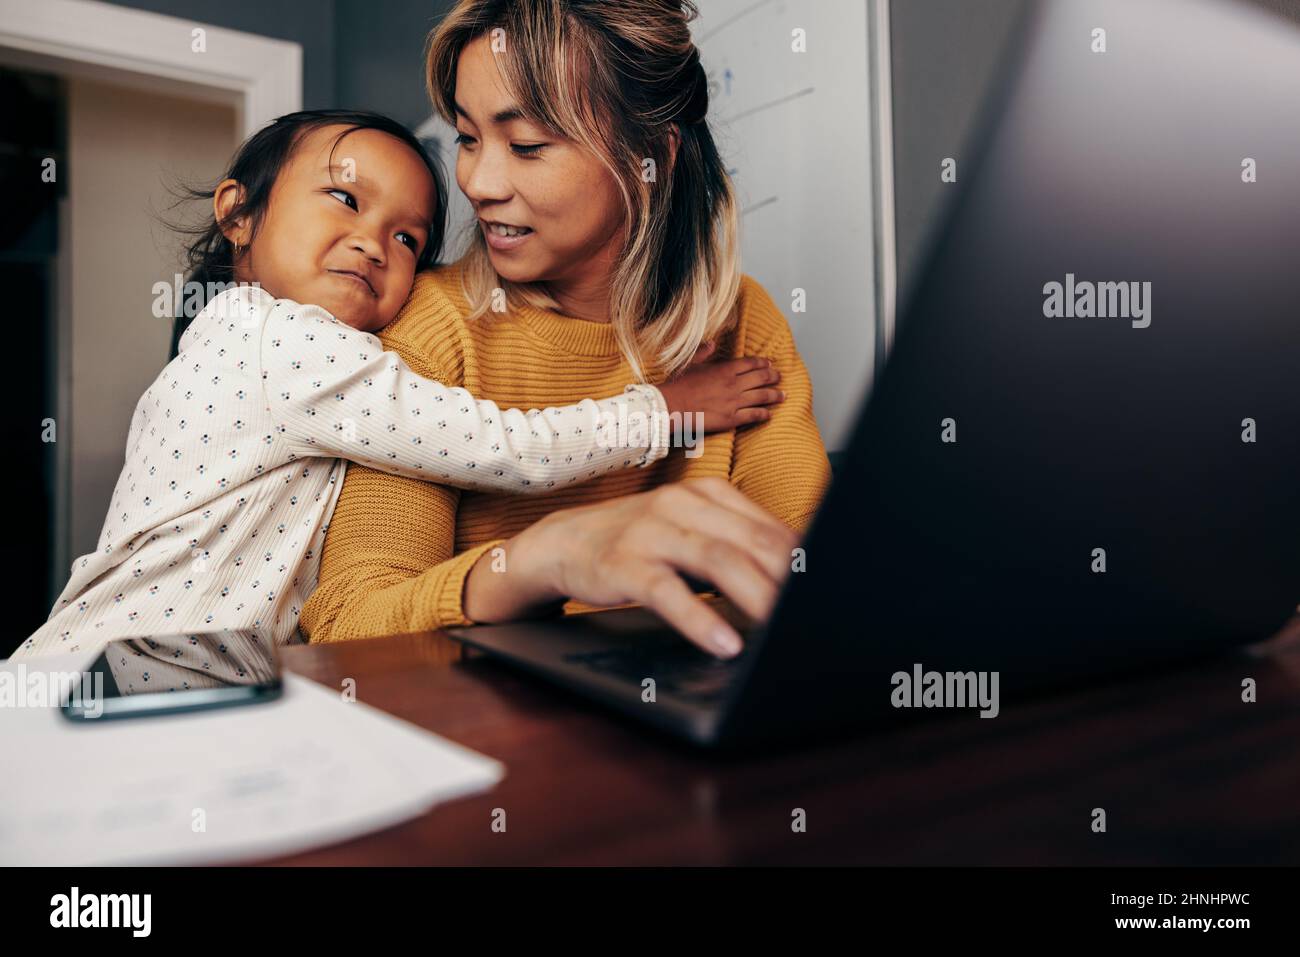 Adorable little girl embracing her mom in her home office. Working mom smiling at her daughter while typing an email on a laptop. Self-employed mother Stock Photo